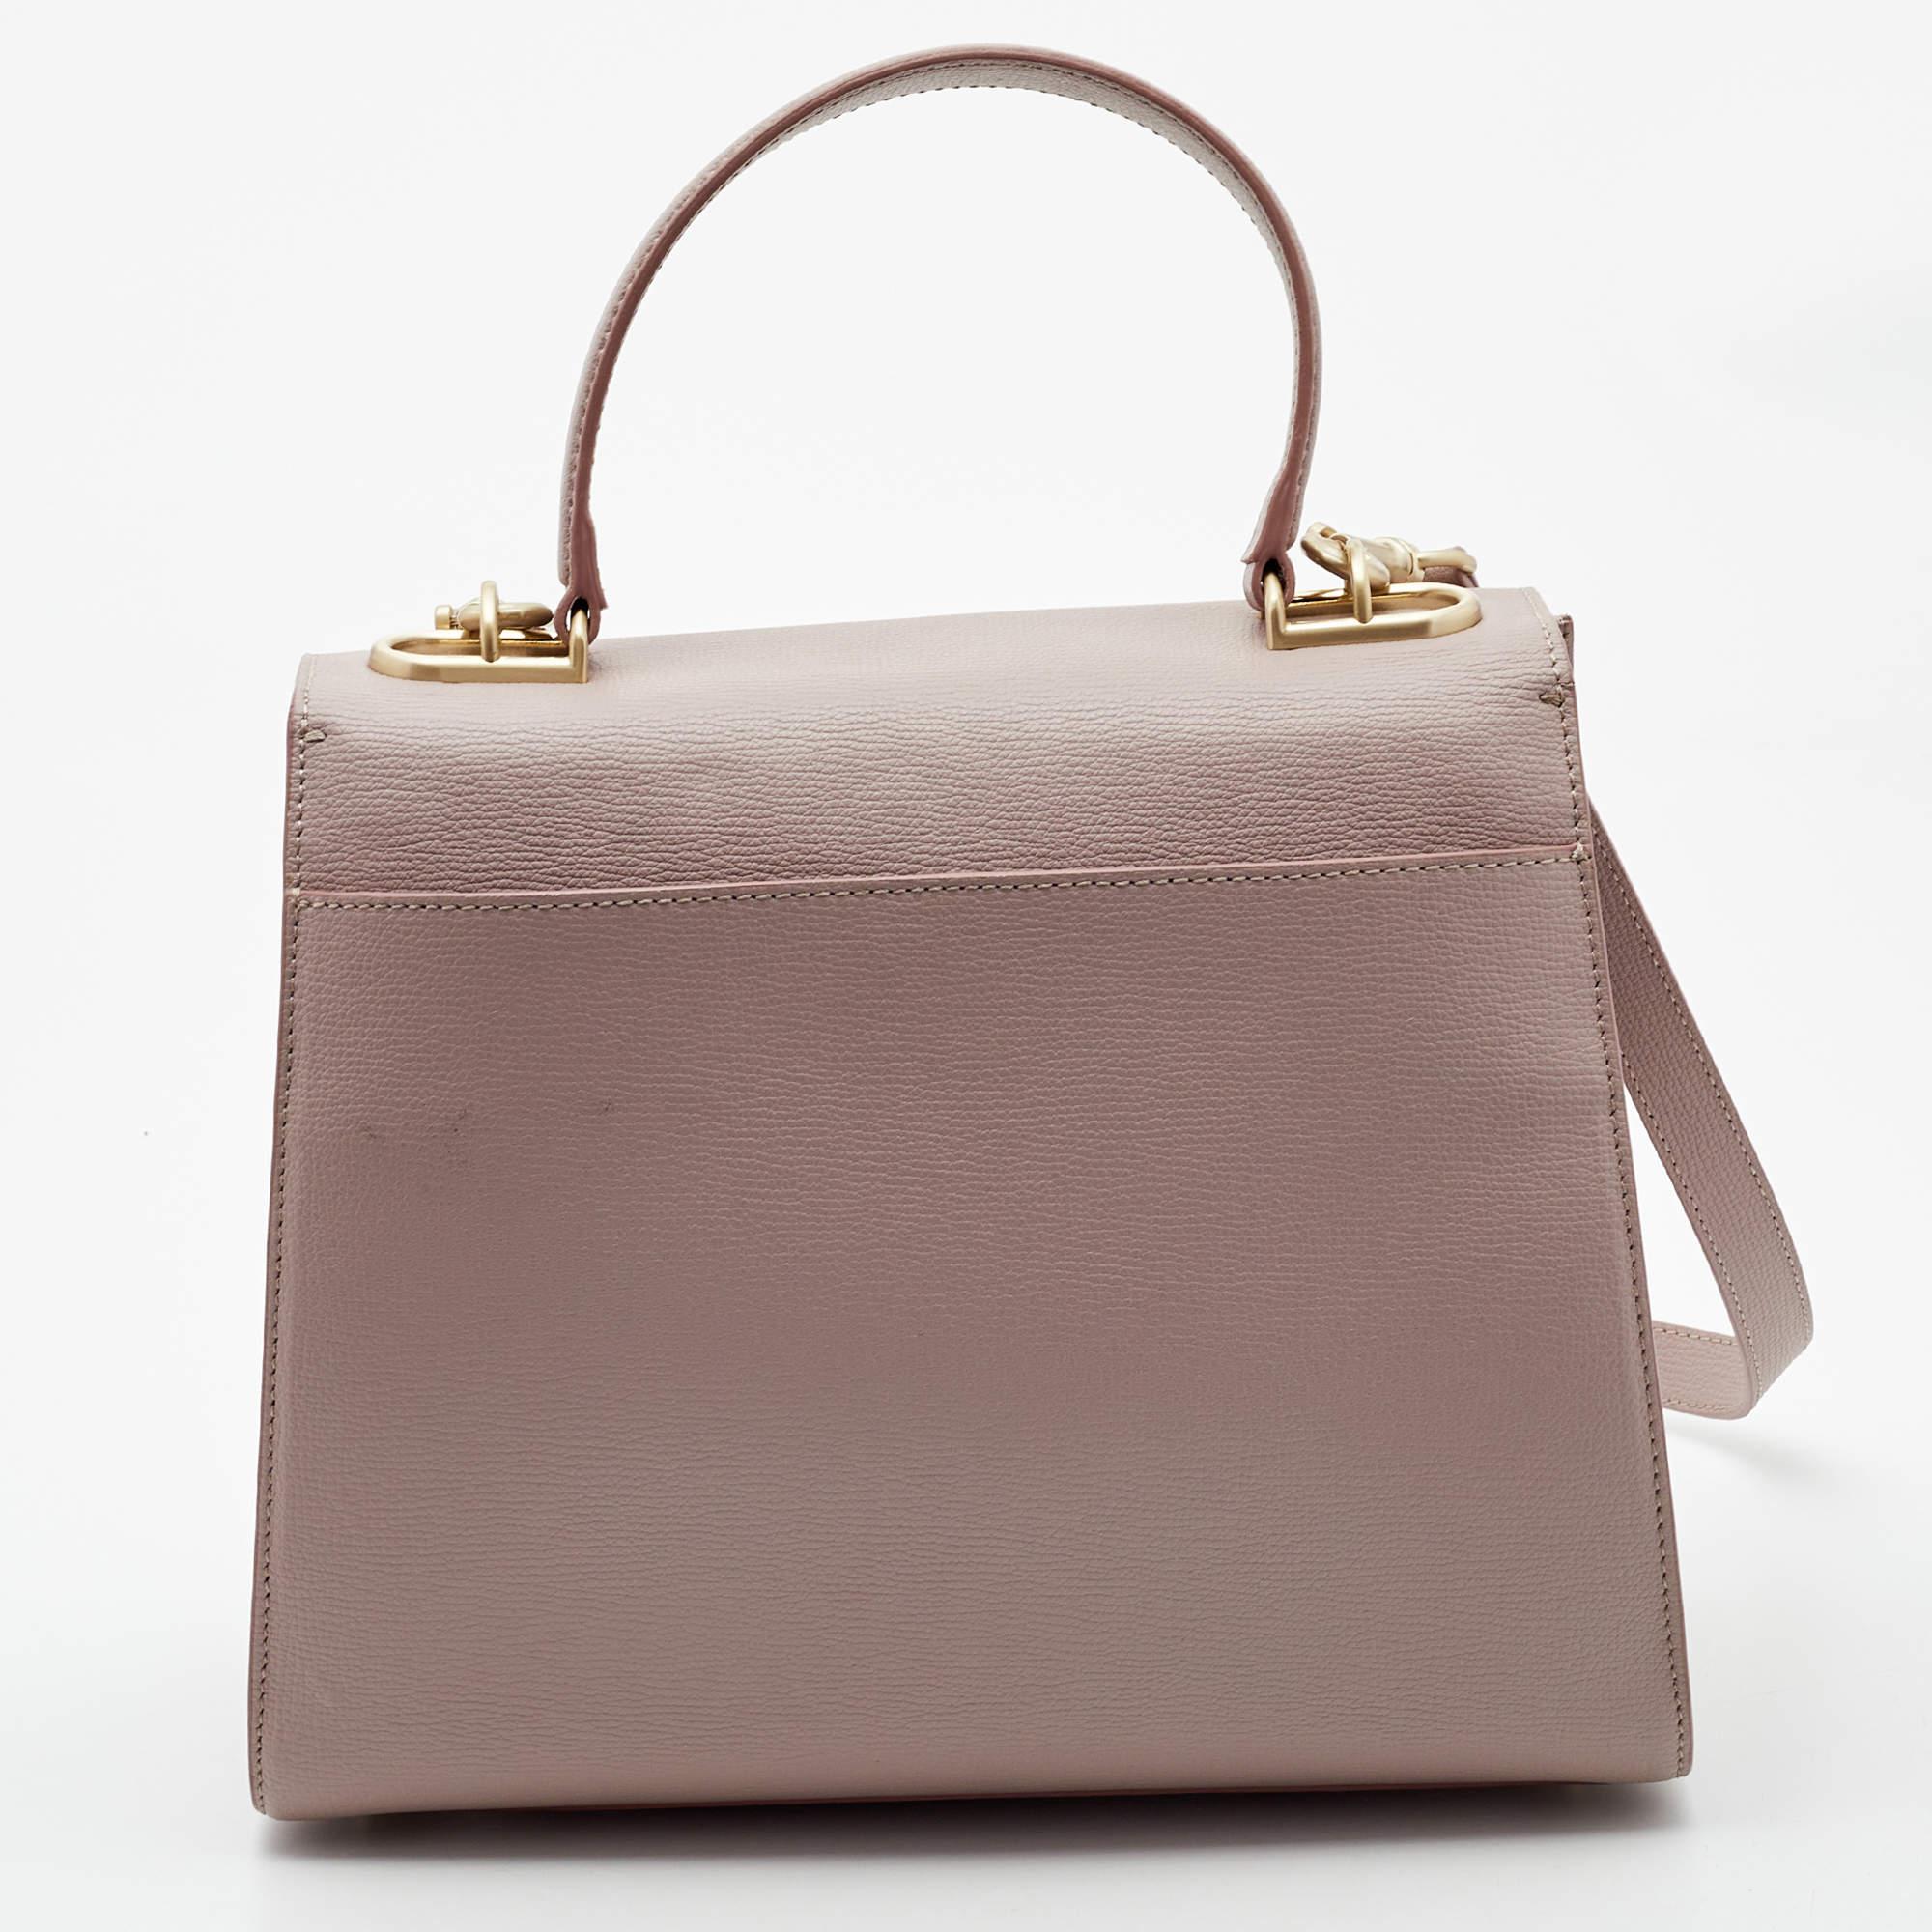 Exuding unparalleled elegance and sophistication, this Aigner bag is made from the finest material in a gorgeous hue. While the roomy interior offers ample space, the top handle allows you to carry it with much elegance.

Includes: Original Dustbag,